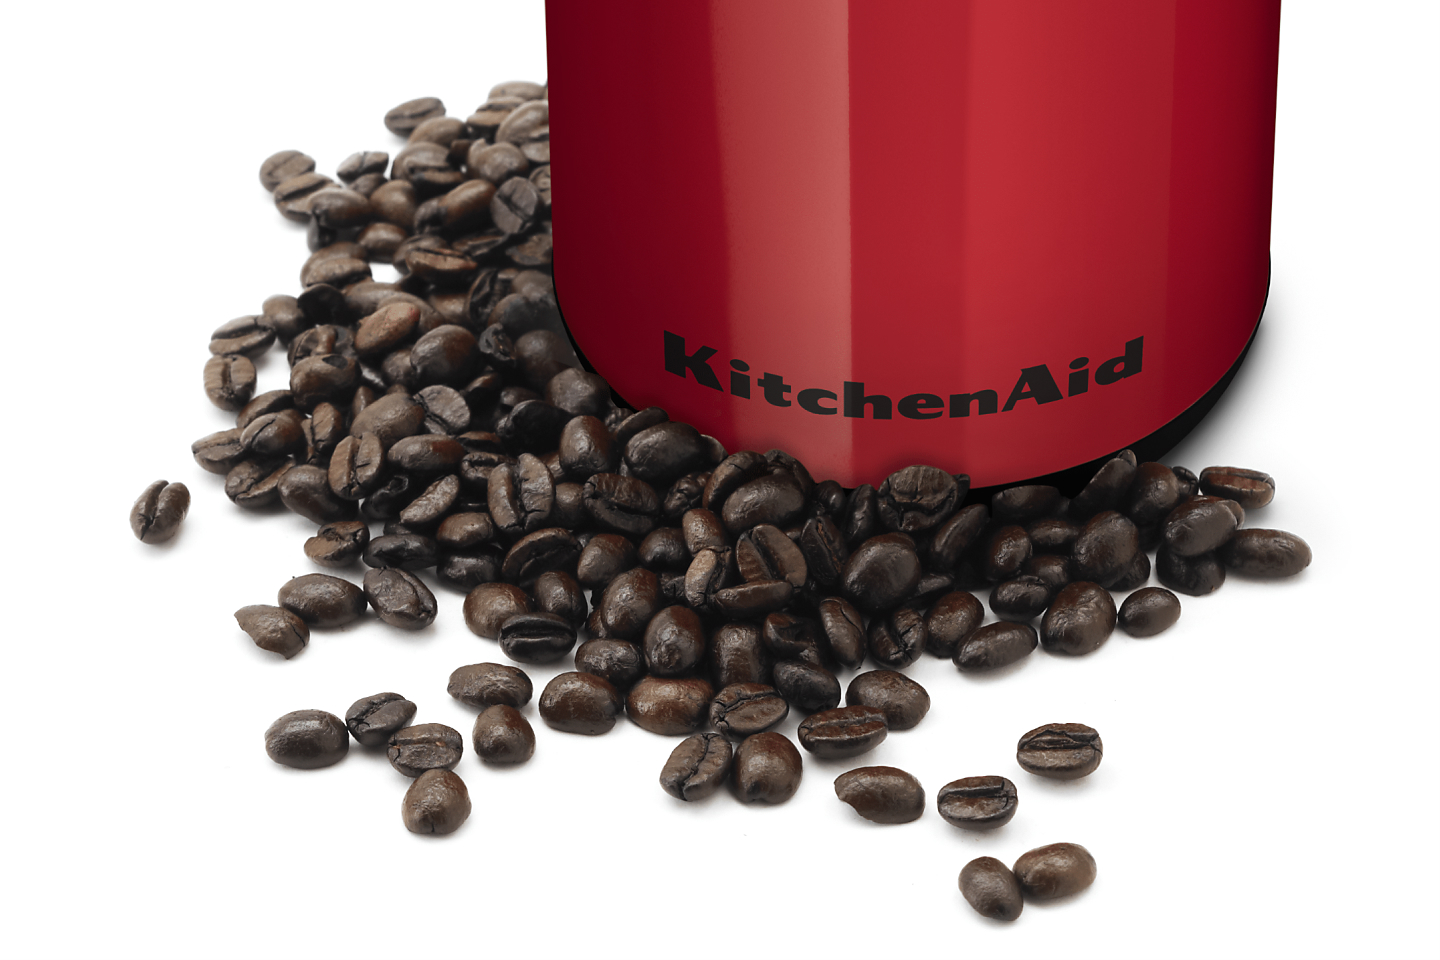 Whole coffee beans in front of a red KitchenAid® coffee grinder